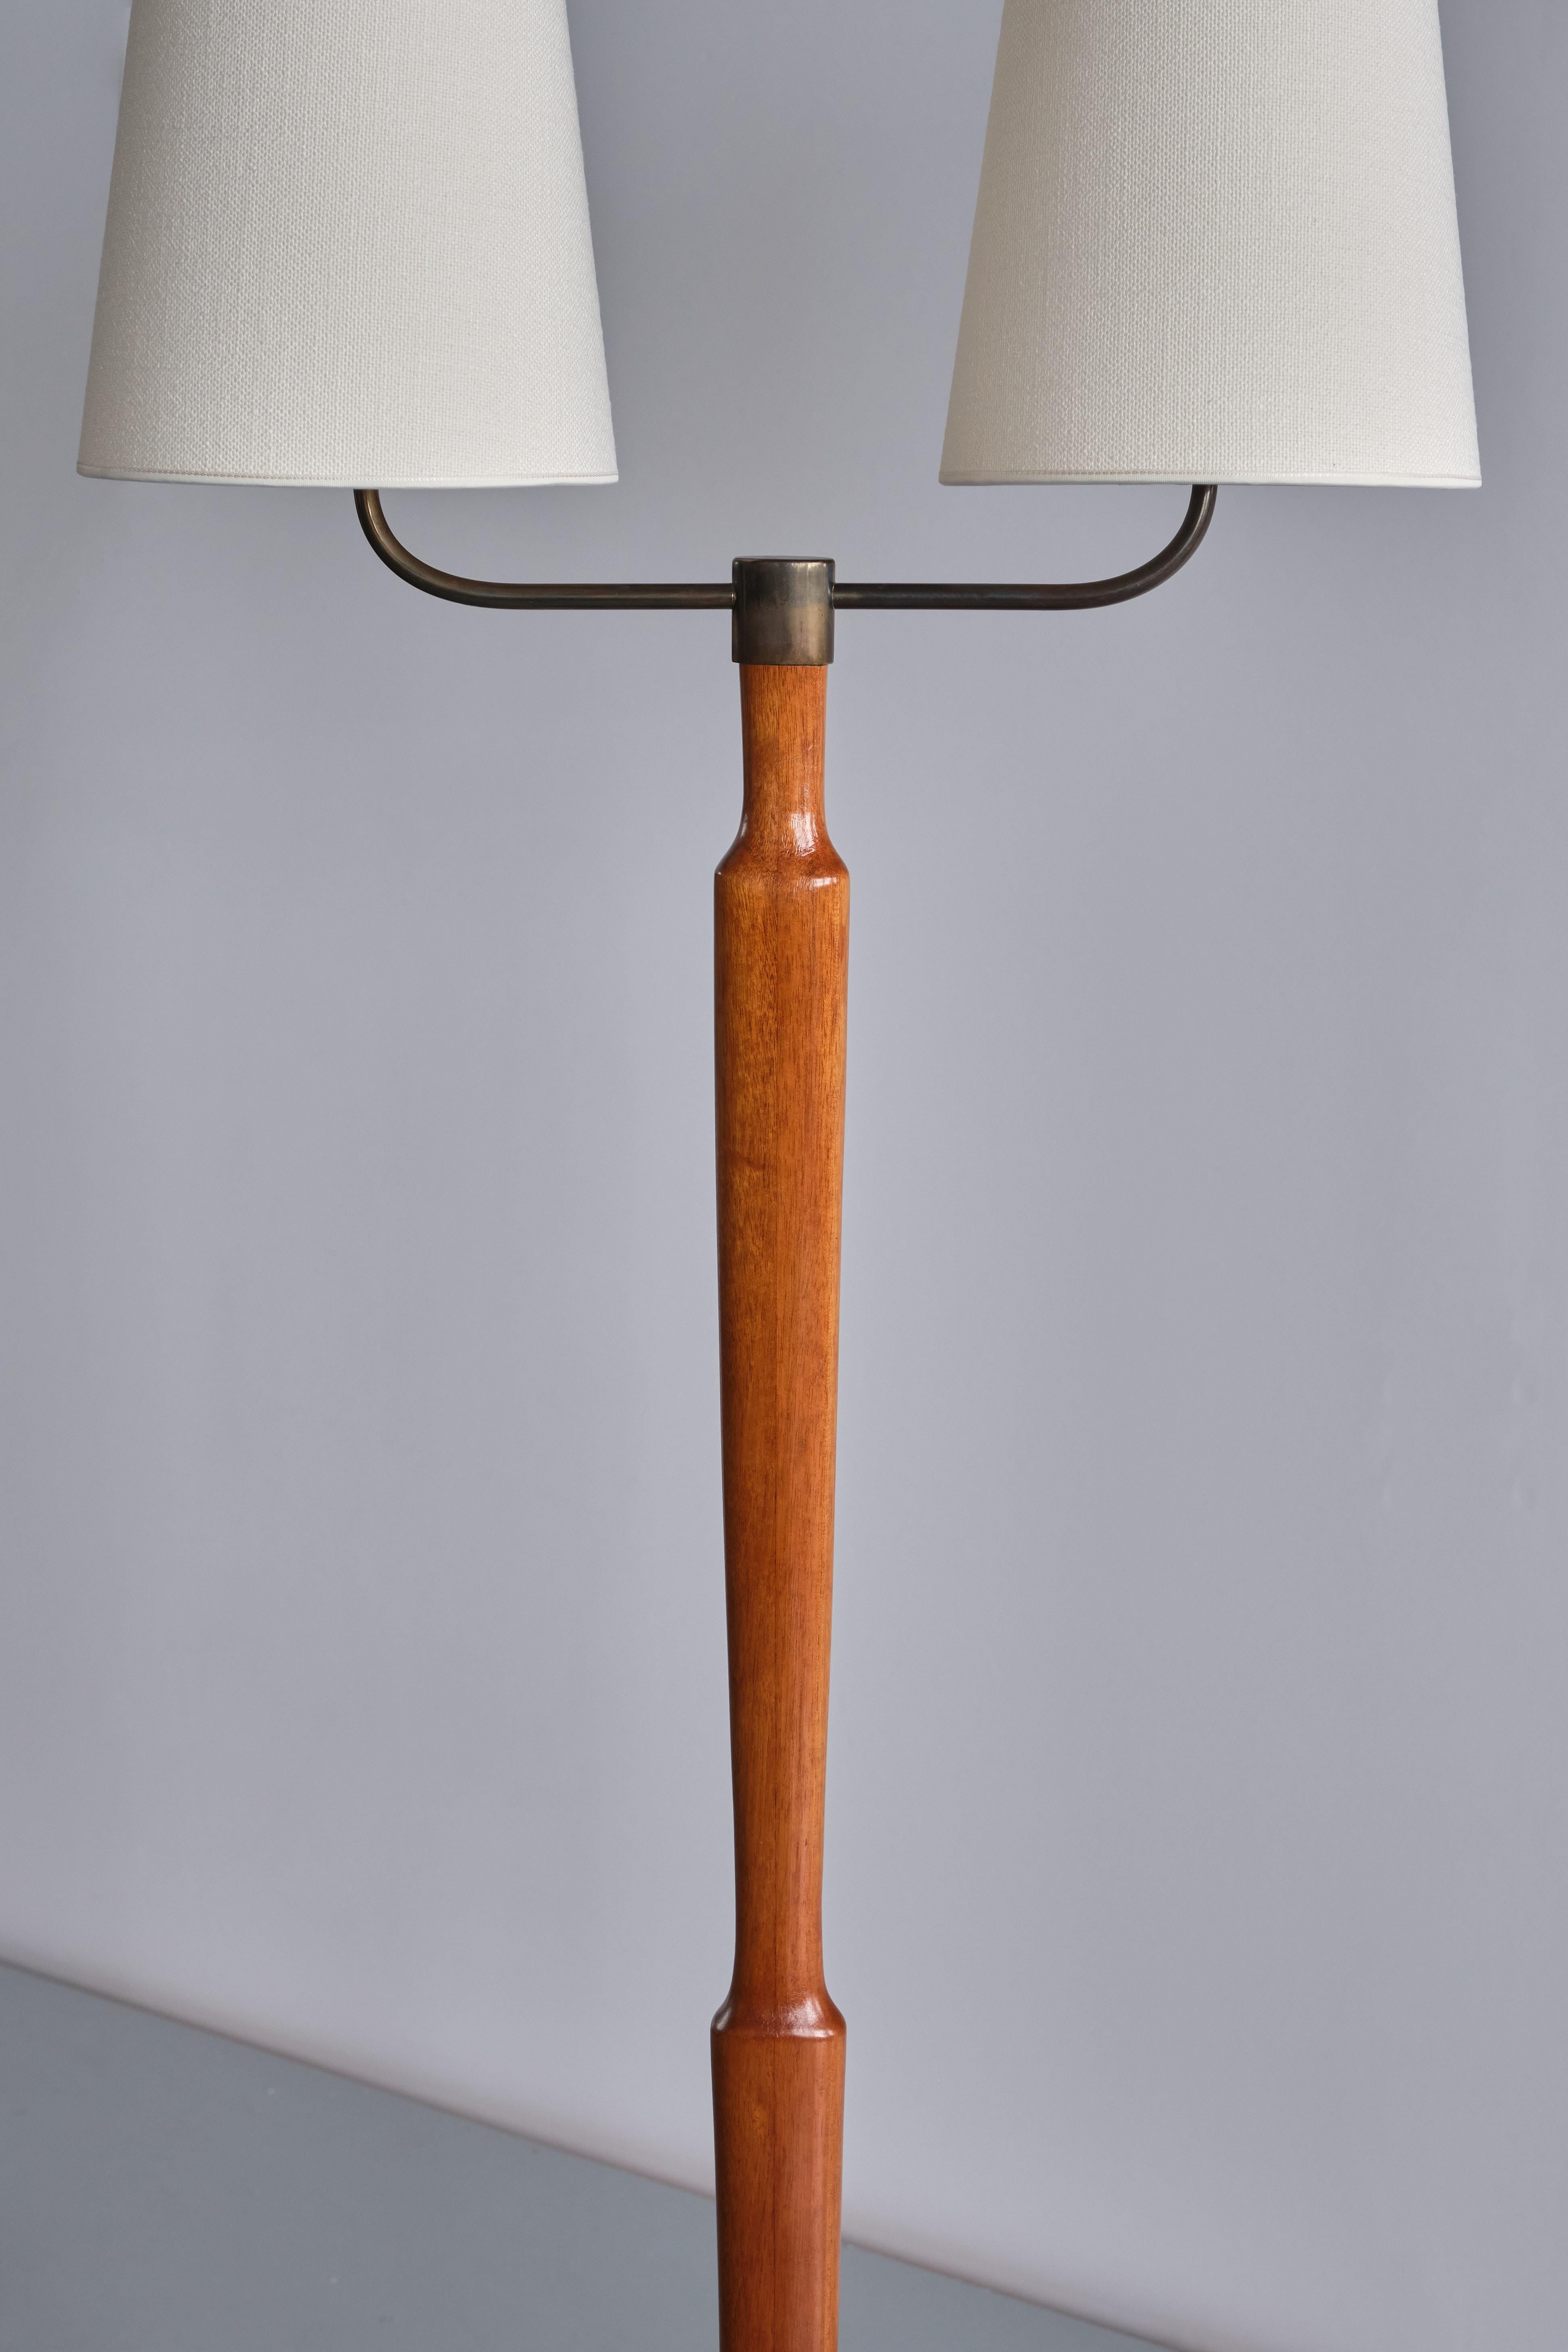 Swedish Modern Two Arm Floor Lamp in Teak Wood and Brass, Sweden, Late 1940s For Sale 3